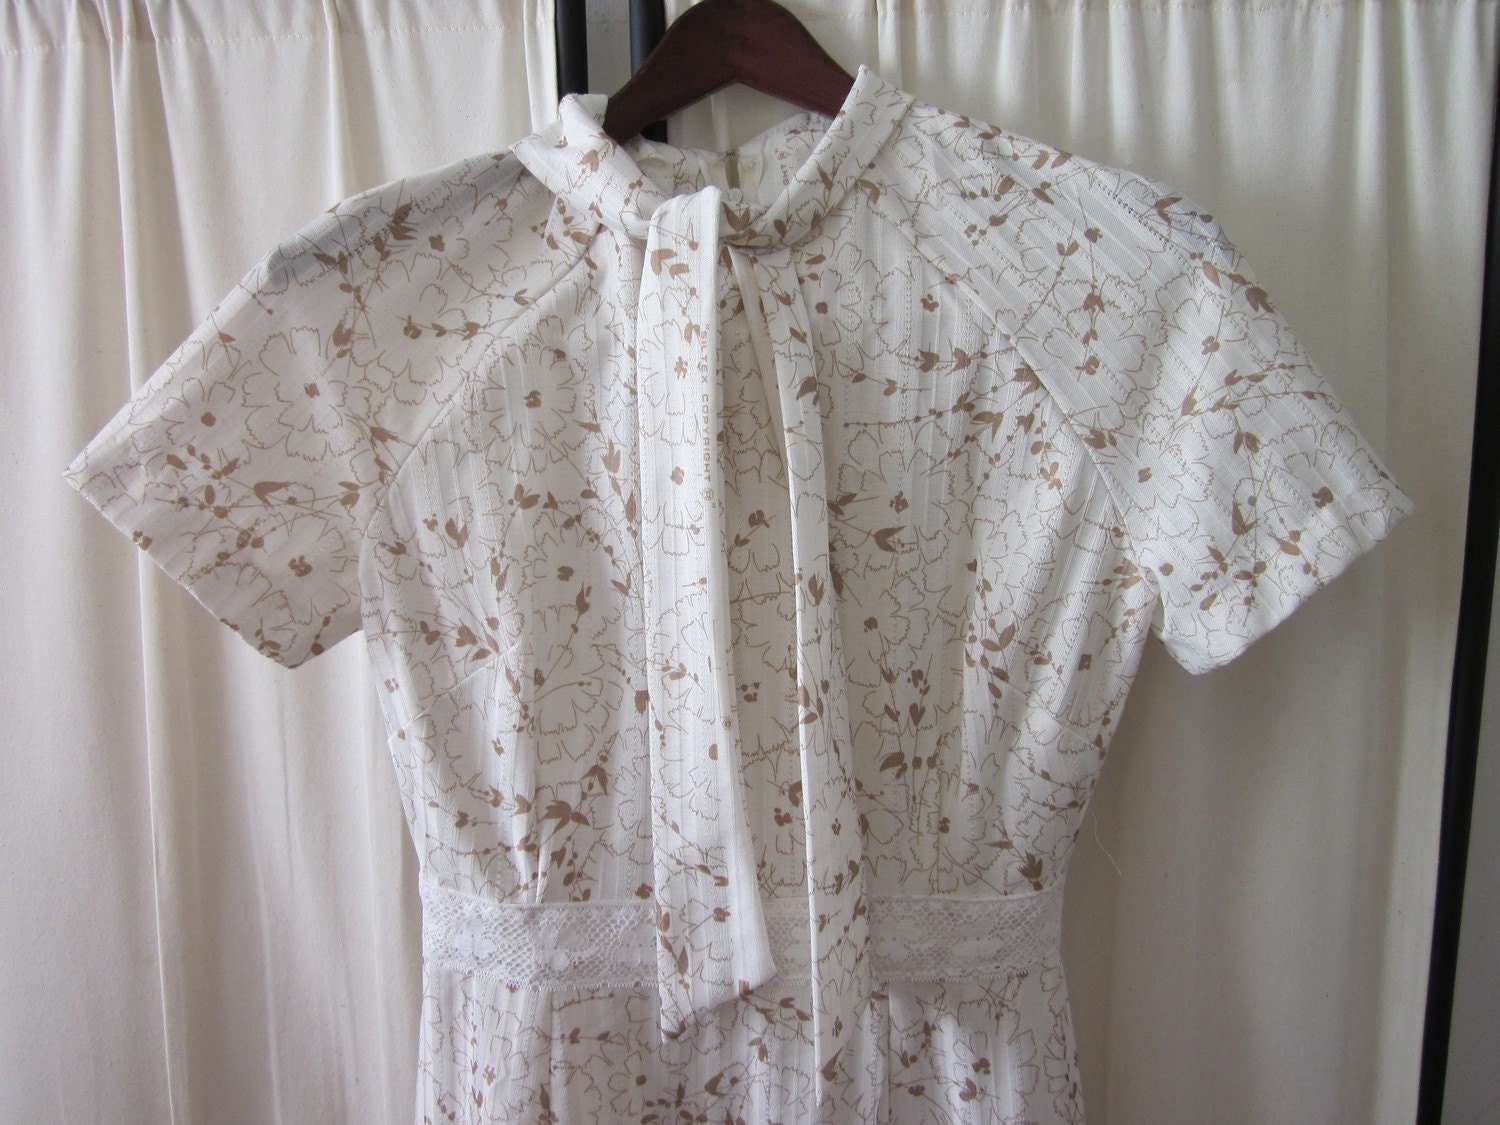 Vintage 60s White and Gold Floral Pattern Dress (S)